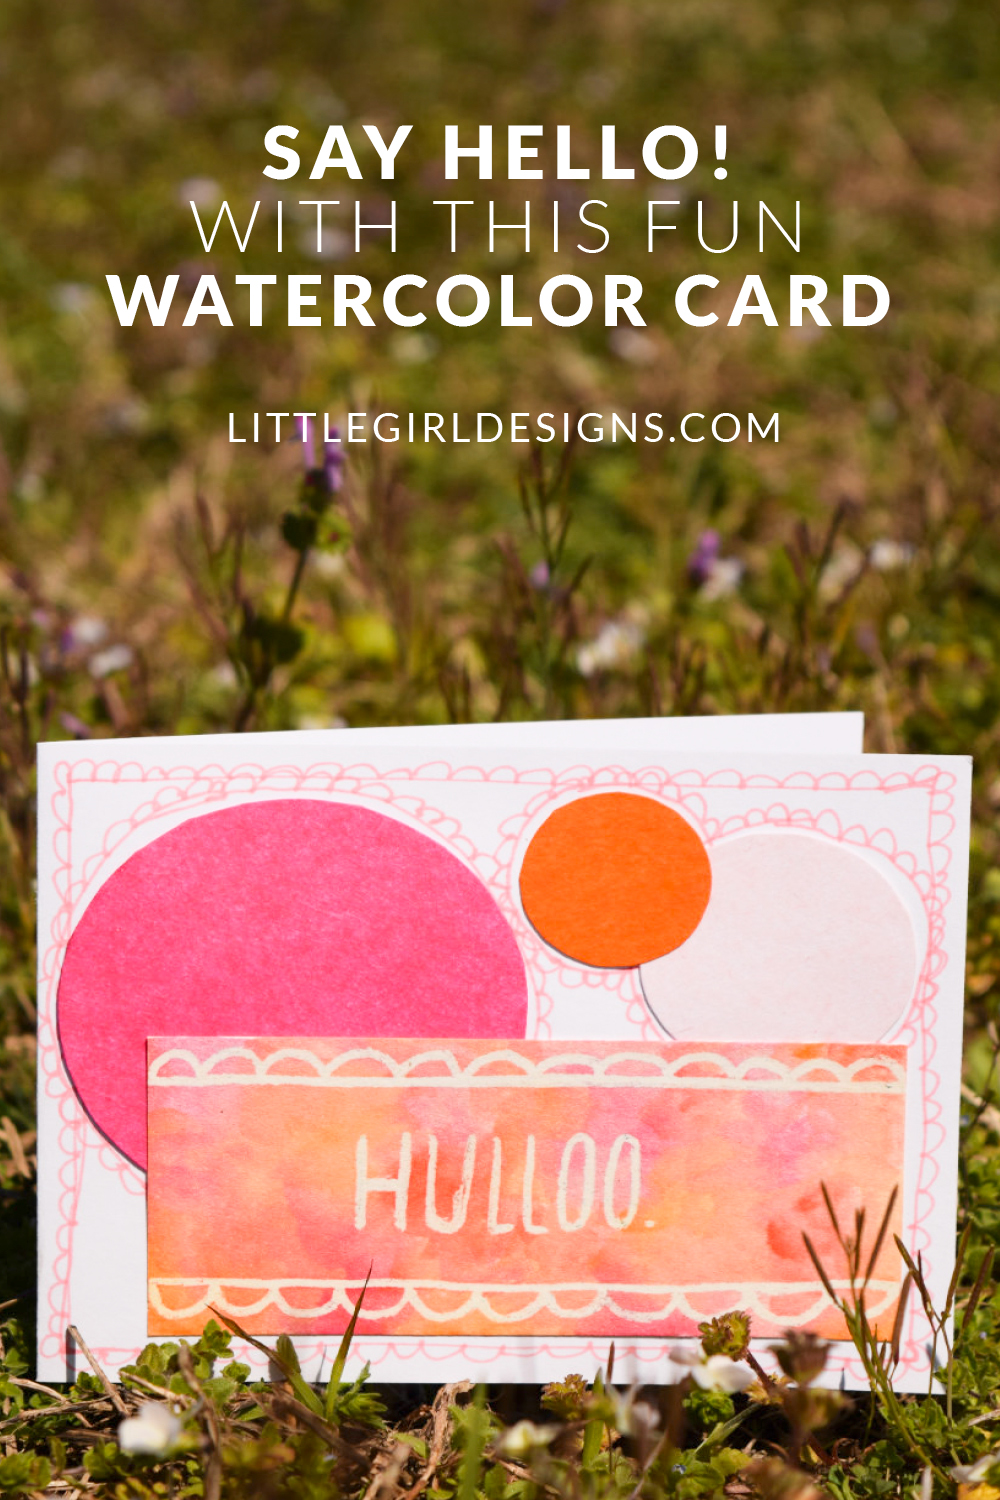 Say "Hello!" with this whimsical watercolor card by Maggie of Maggie's Butterfly Kisses. Send someone a smile in the mail today! #30daymailboxlove